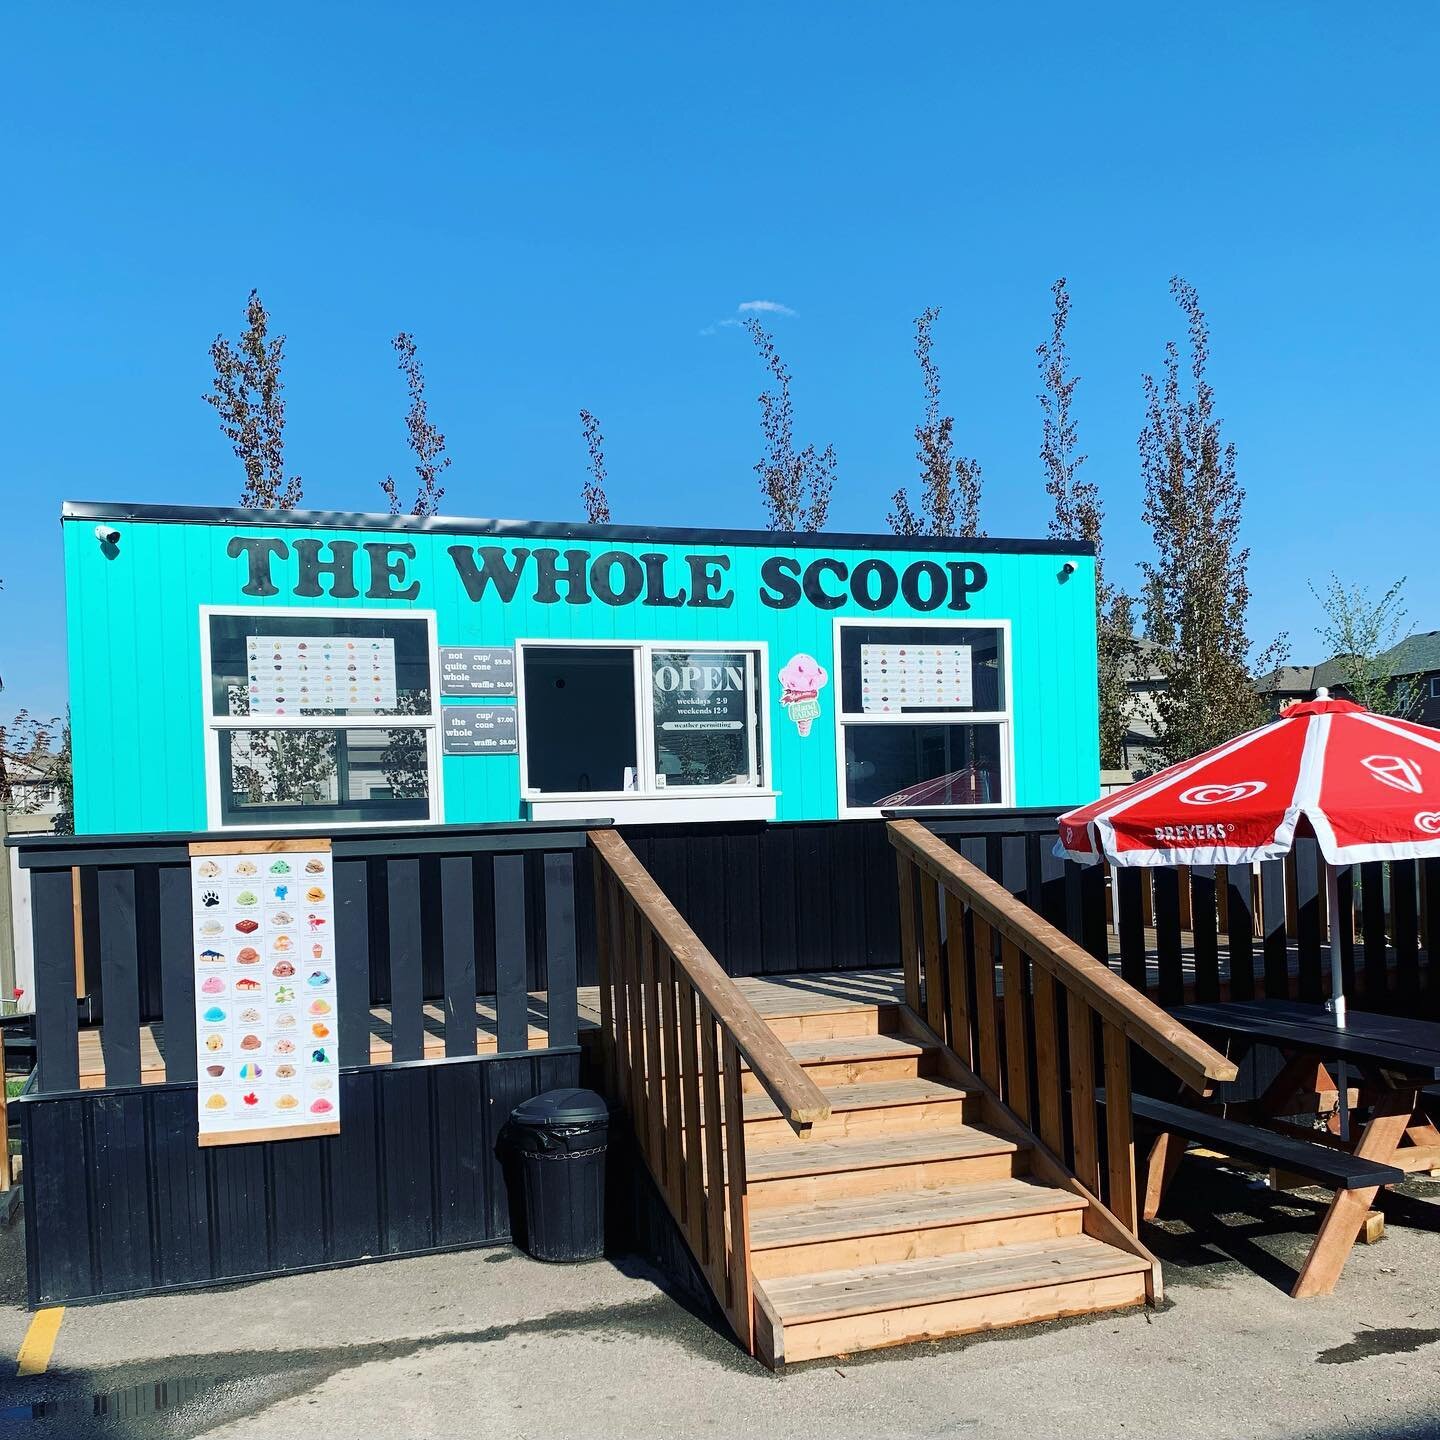 Look at that beautiful blue sky!! 

Have you joined us yet for your favorite scoop?! 

Just a reminder that our Spruce Grove location is in the same complex, just at the east end 😁

See you soon!!

#icecreamlover #yegicecream #bluesky